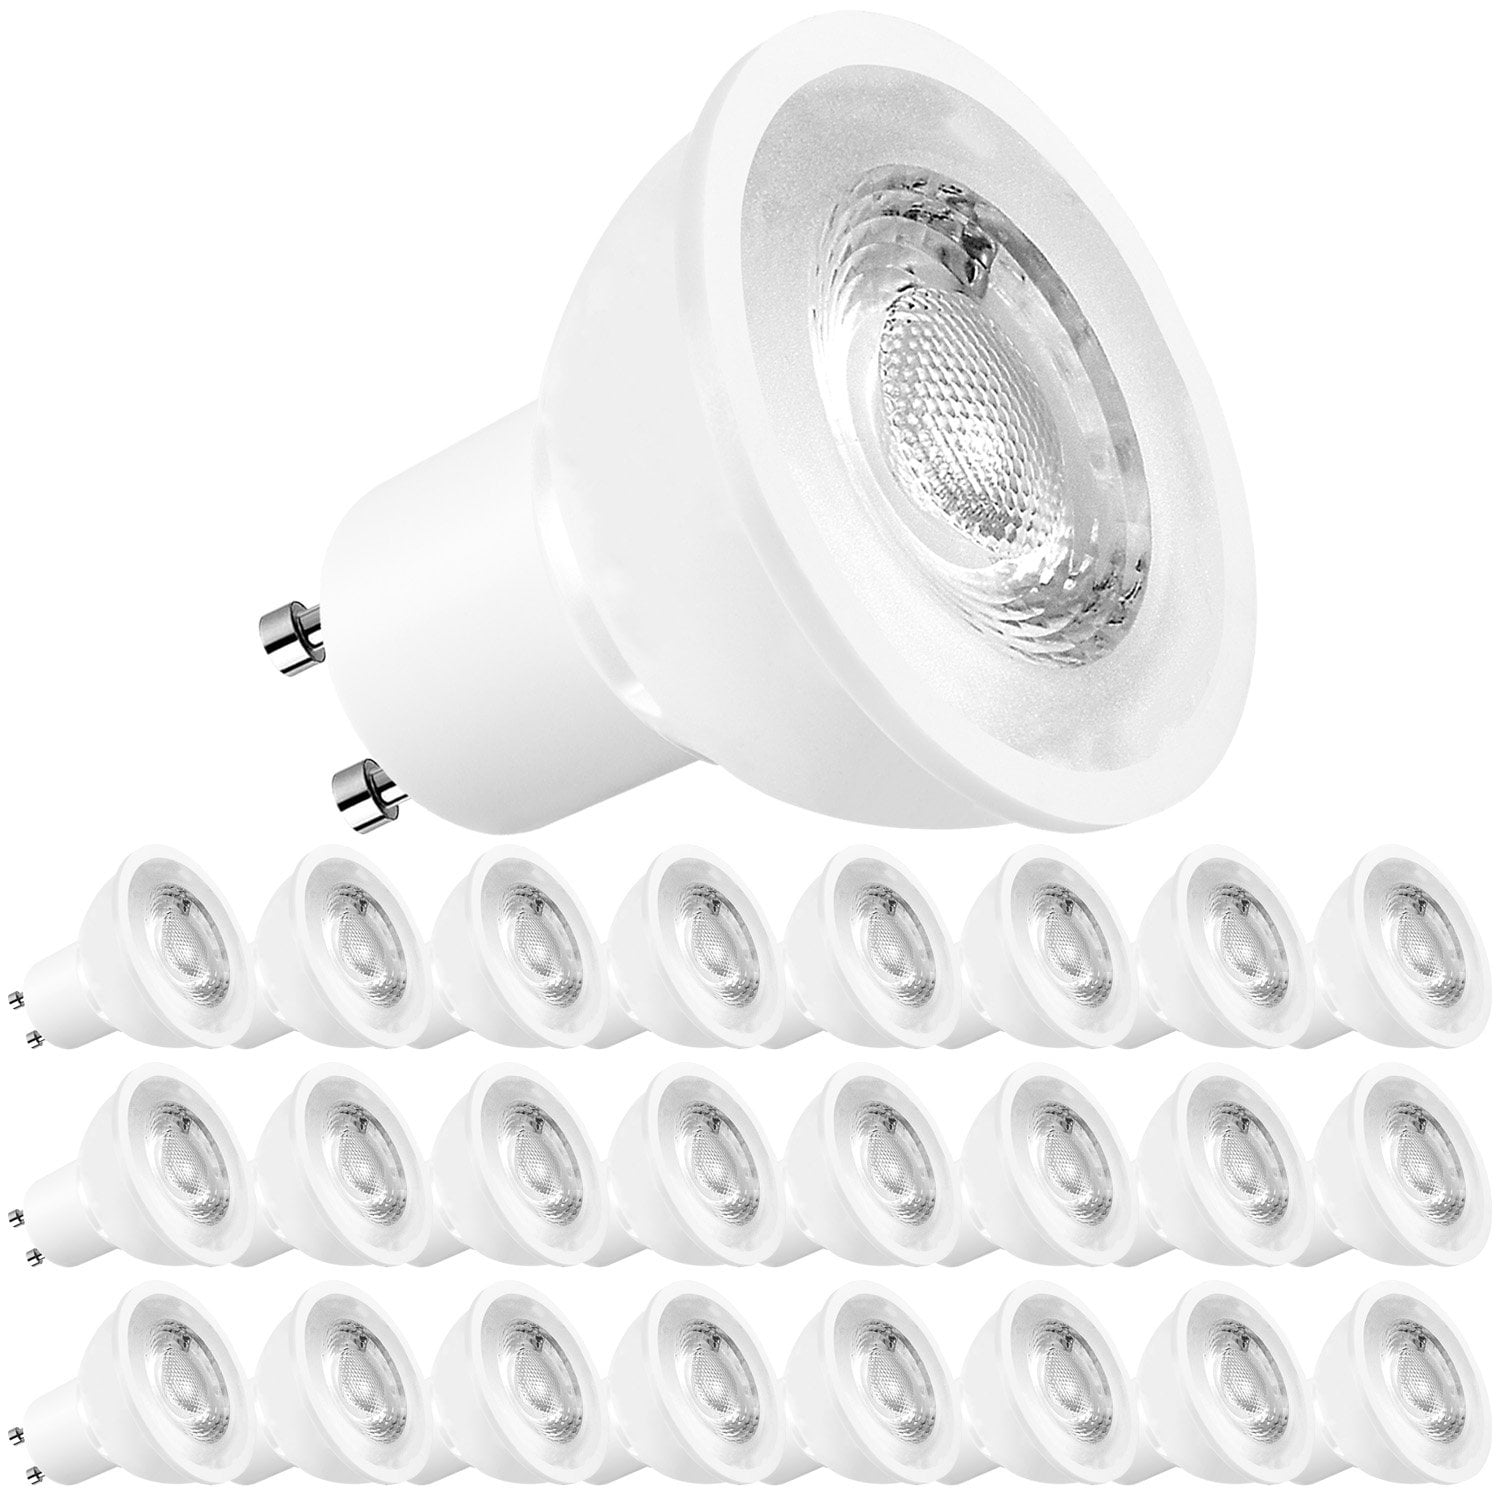 Mantel Mars Luxe Luxrite MR16 GU10 Spotlight LED Bulbs, Dimmable, 4000K Cool White, 500  Lumens, Enclosed Fixture Rated, 24-Pack - Walmart.com